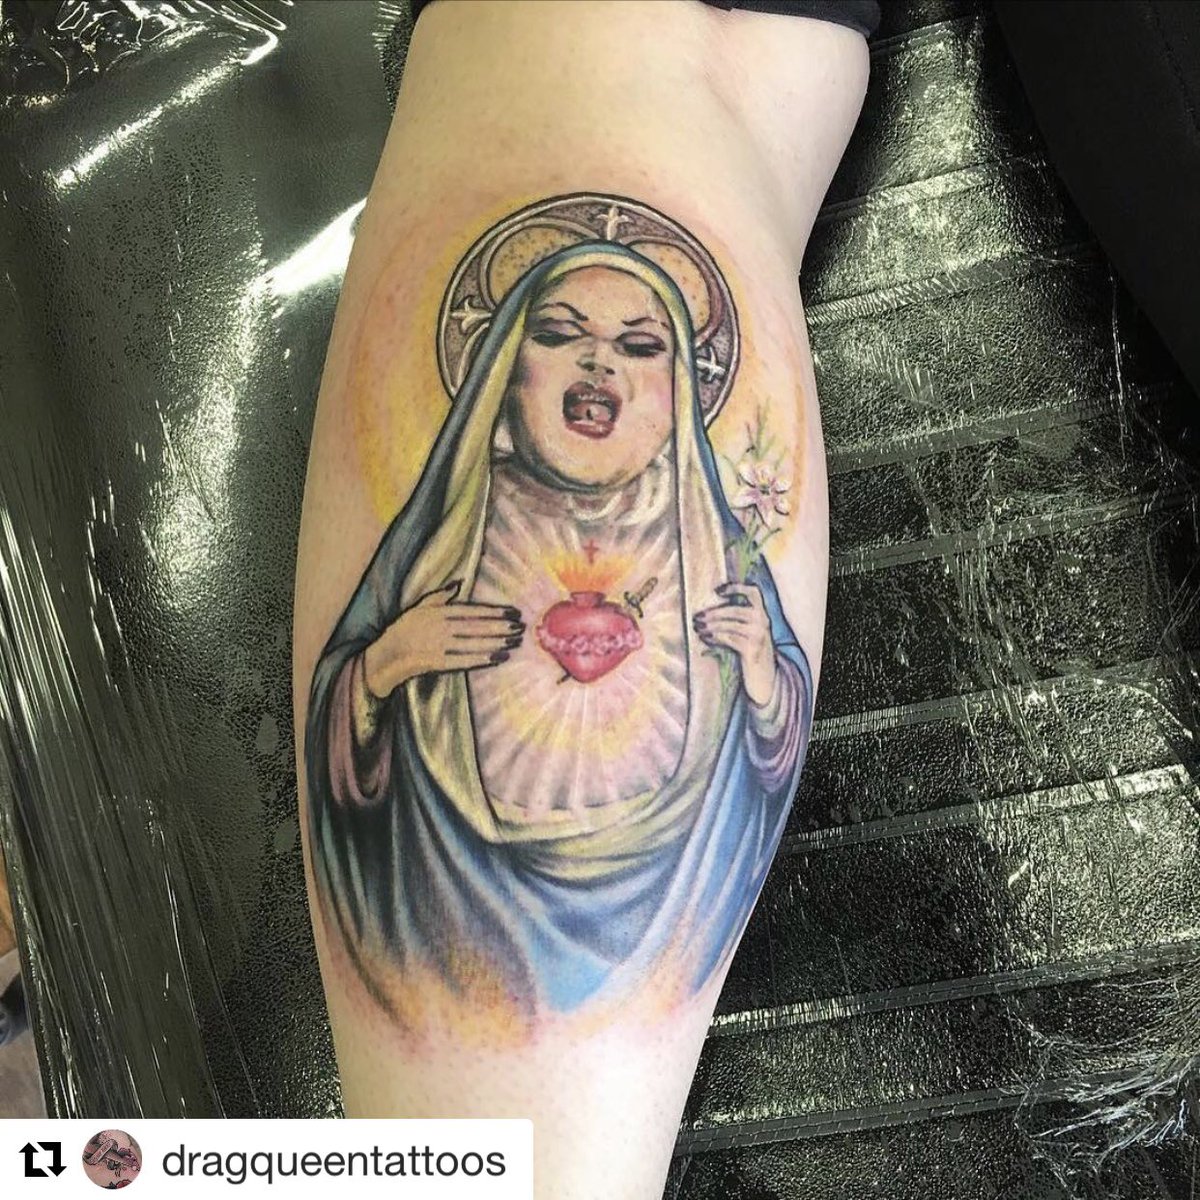 Realistic Divine's portrait tattoo on the thigh.